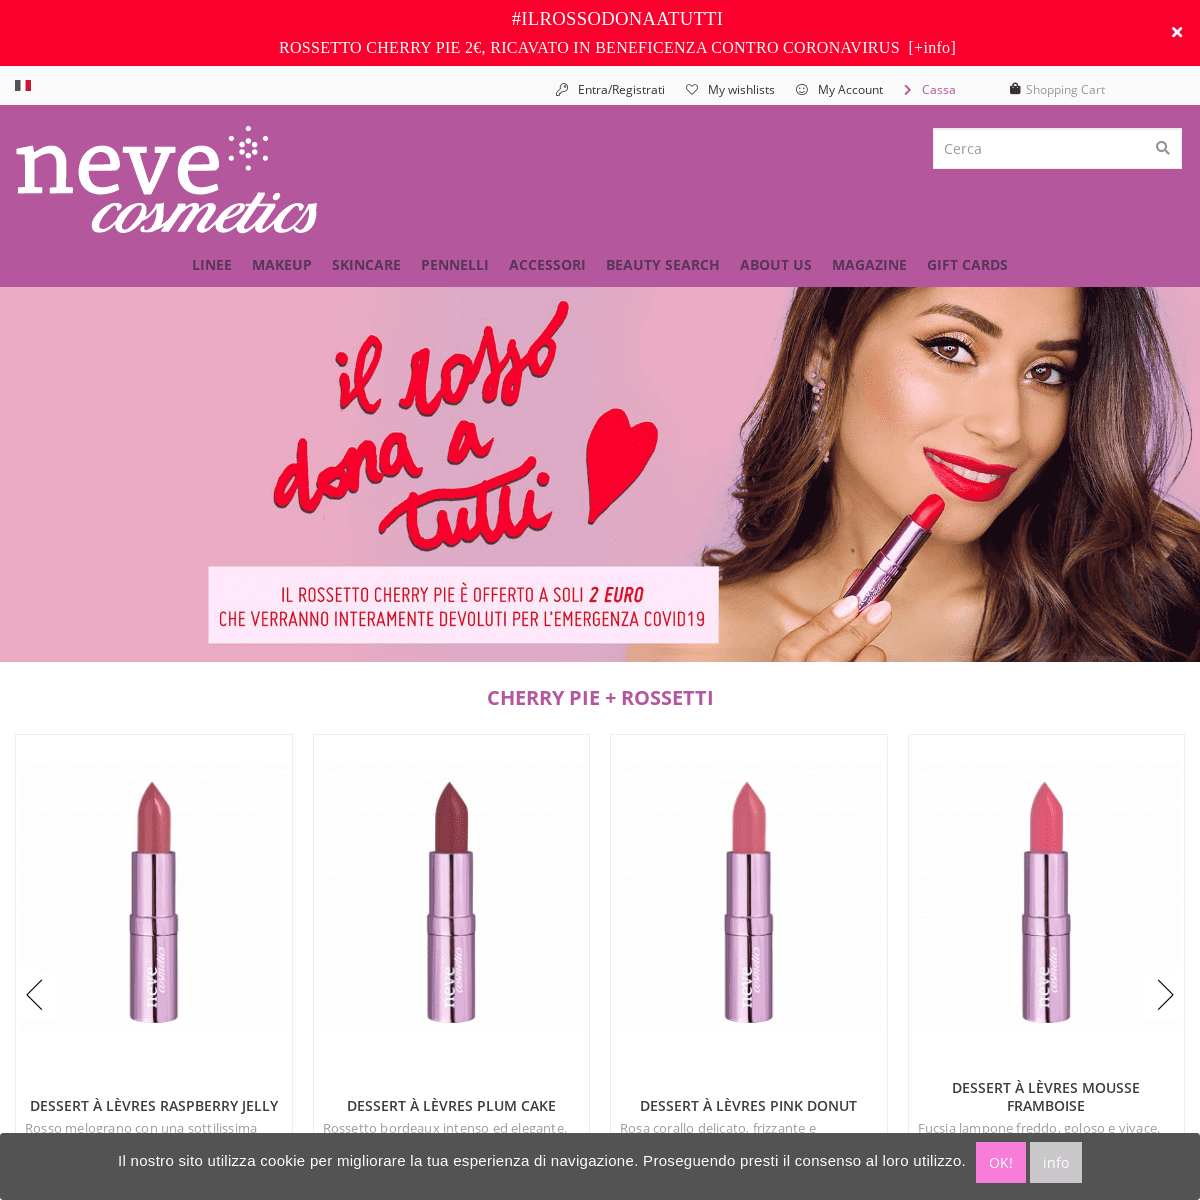 A complete backup of nevecosmetics.it